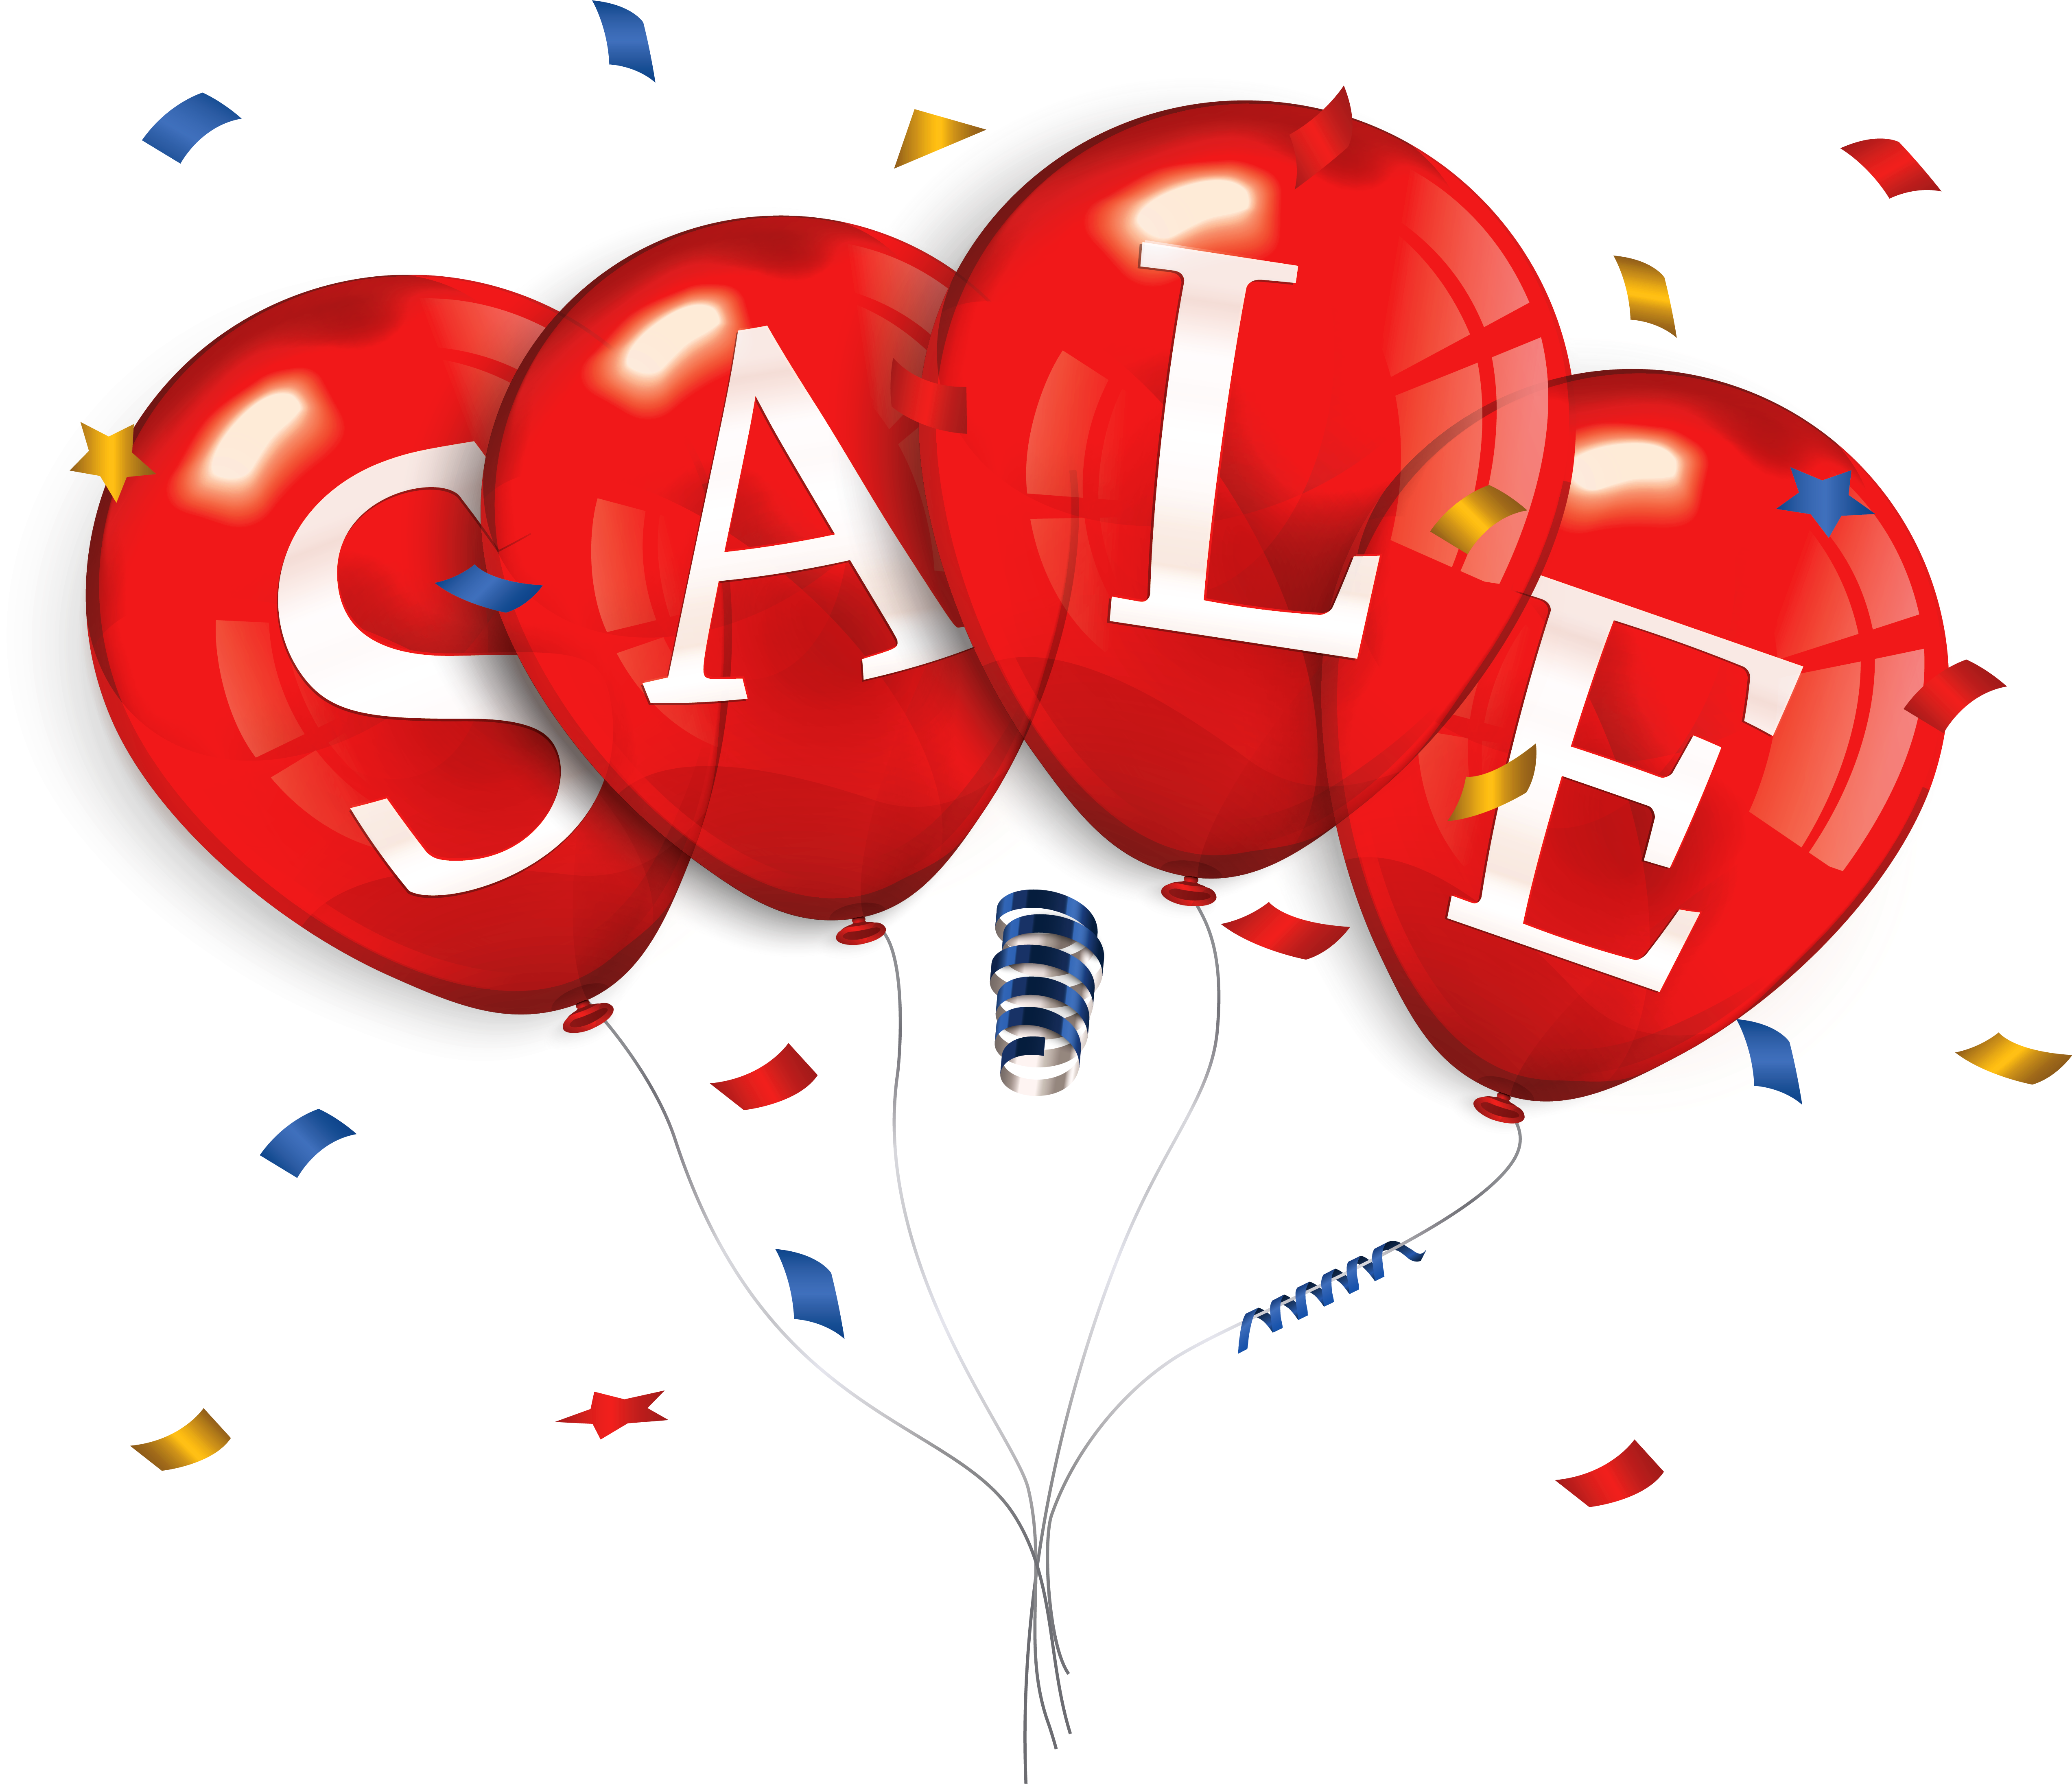 Sale Balloons Png Clipart Image - Sale Balloons Clip Art Transparent Png (5334x4635), Png Download